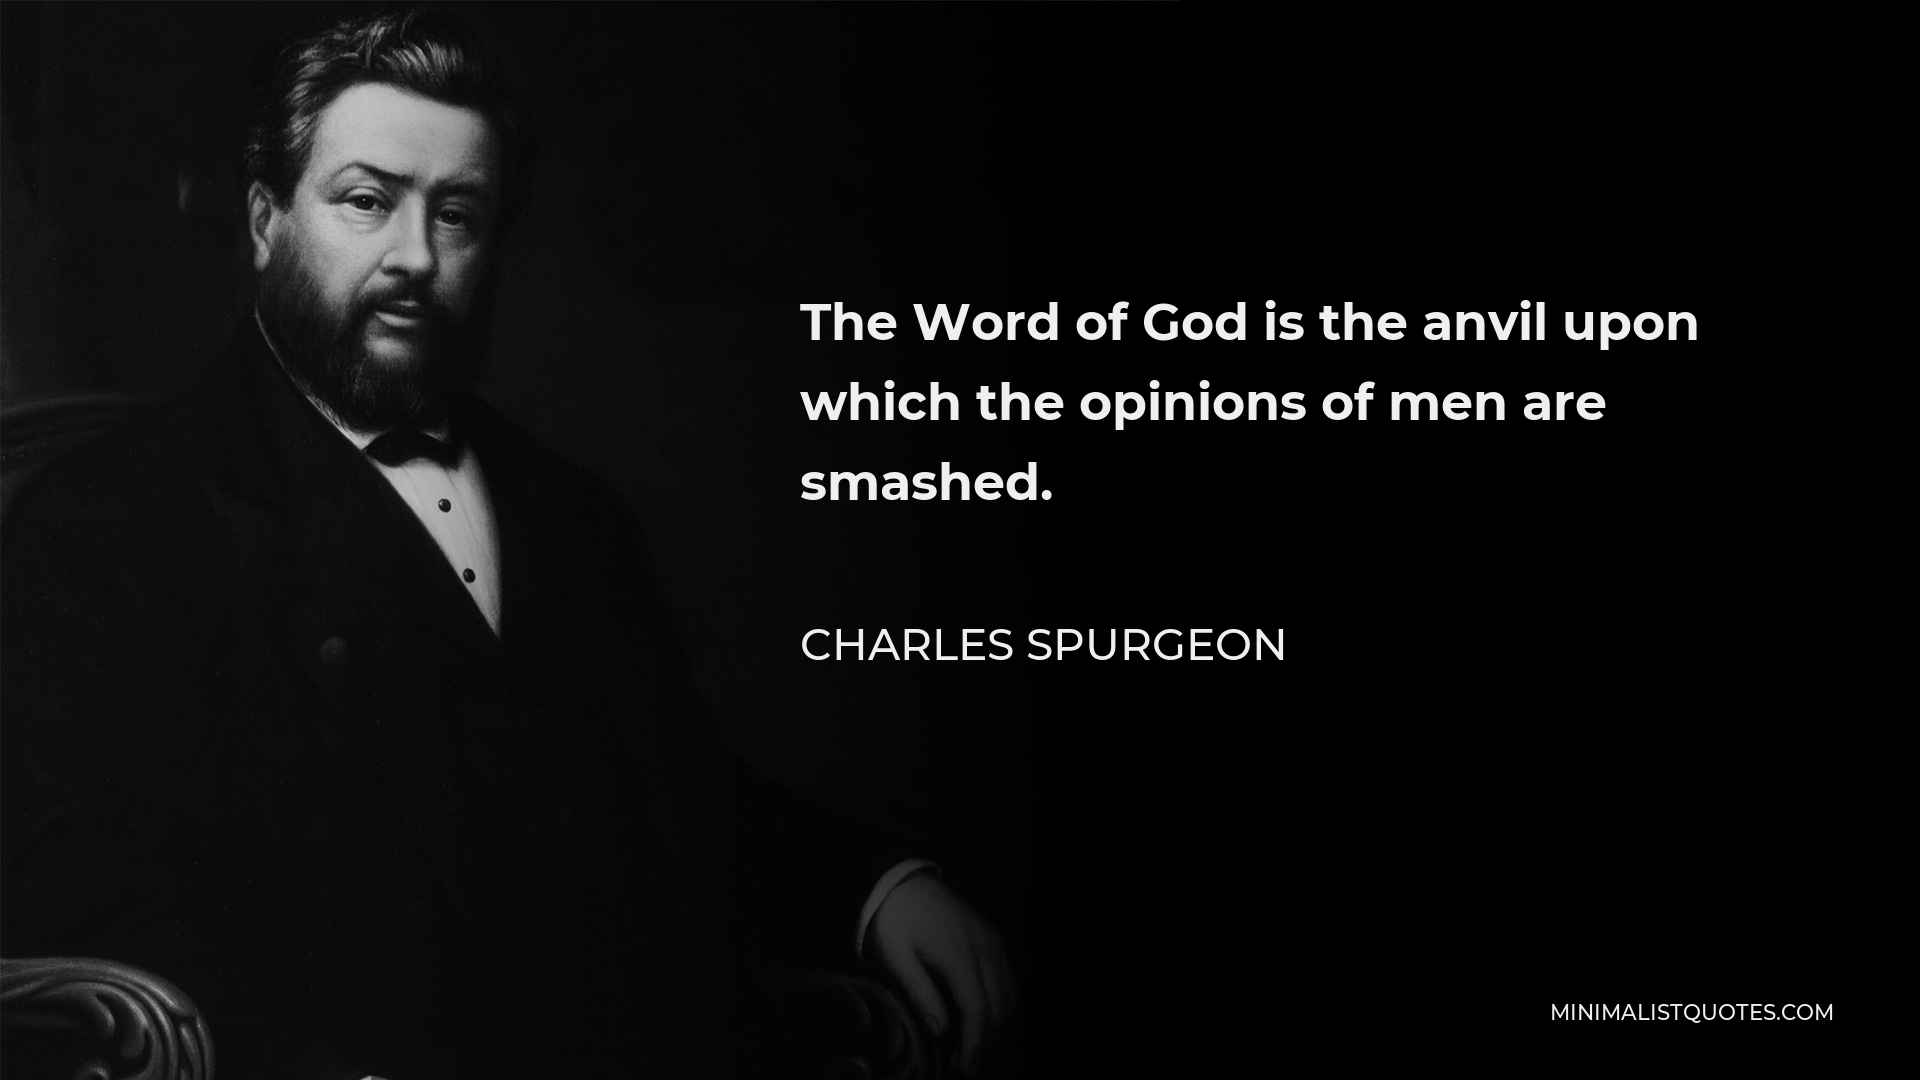 Charles Spurgeon Quote - The Word of God is the anvil upon which the opinions of men are smashed.